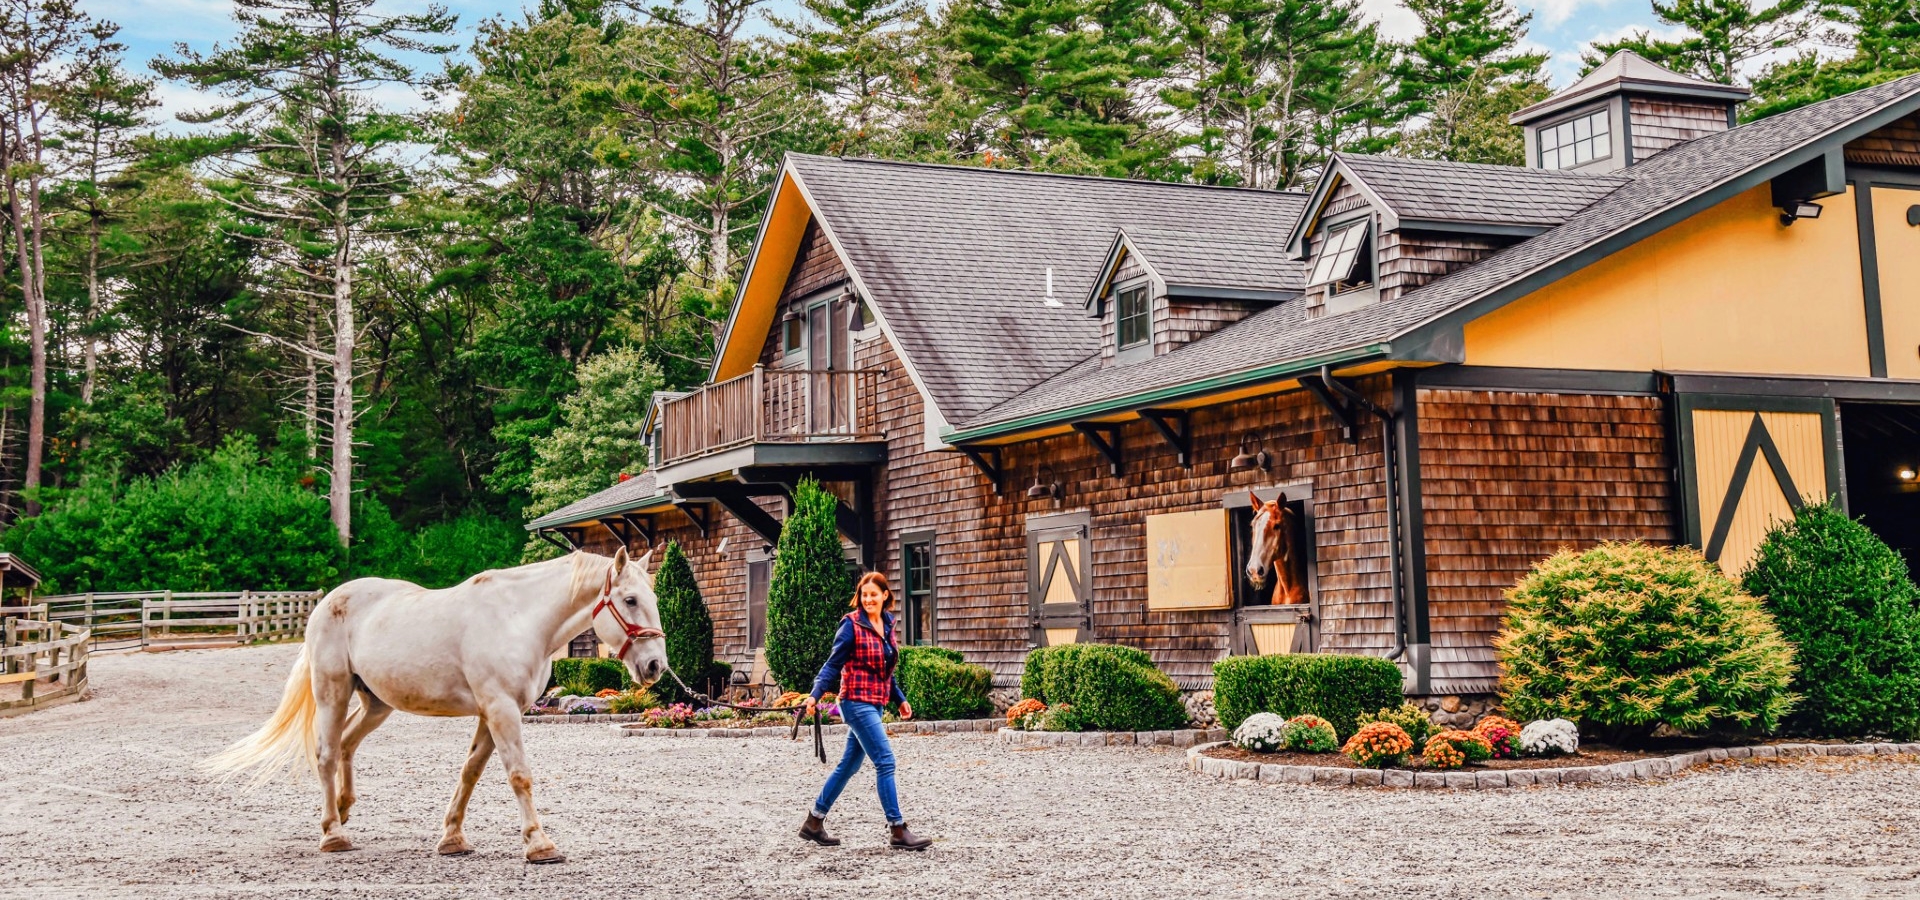 The Preserve Resort & Spa’s serene setting with equestrian facilities as highlighted in Equestrian Living.